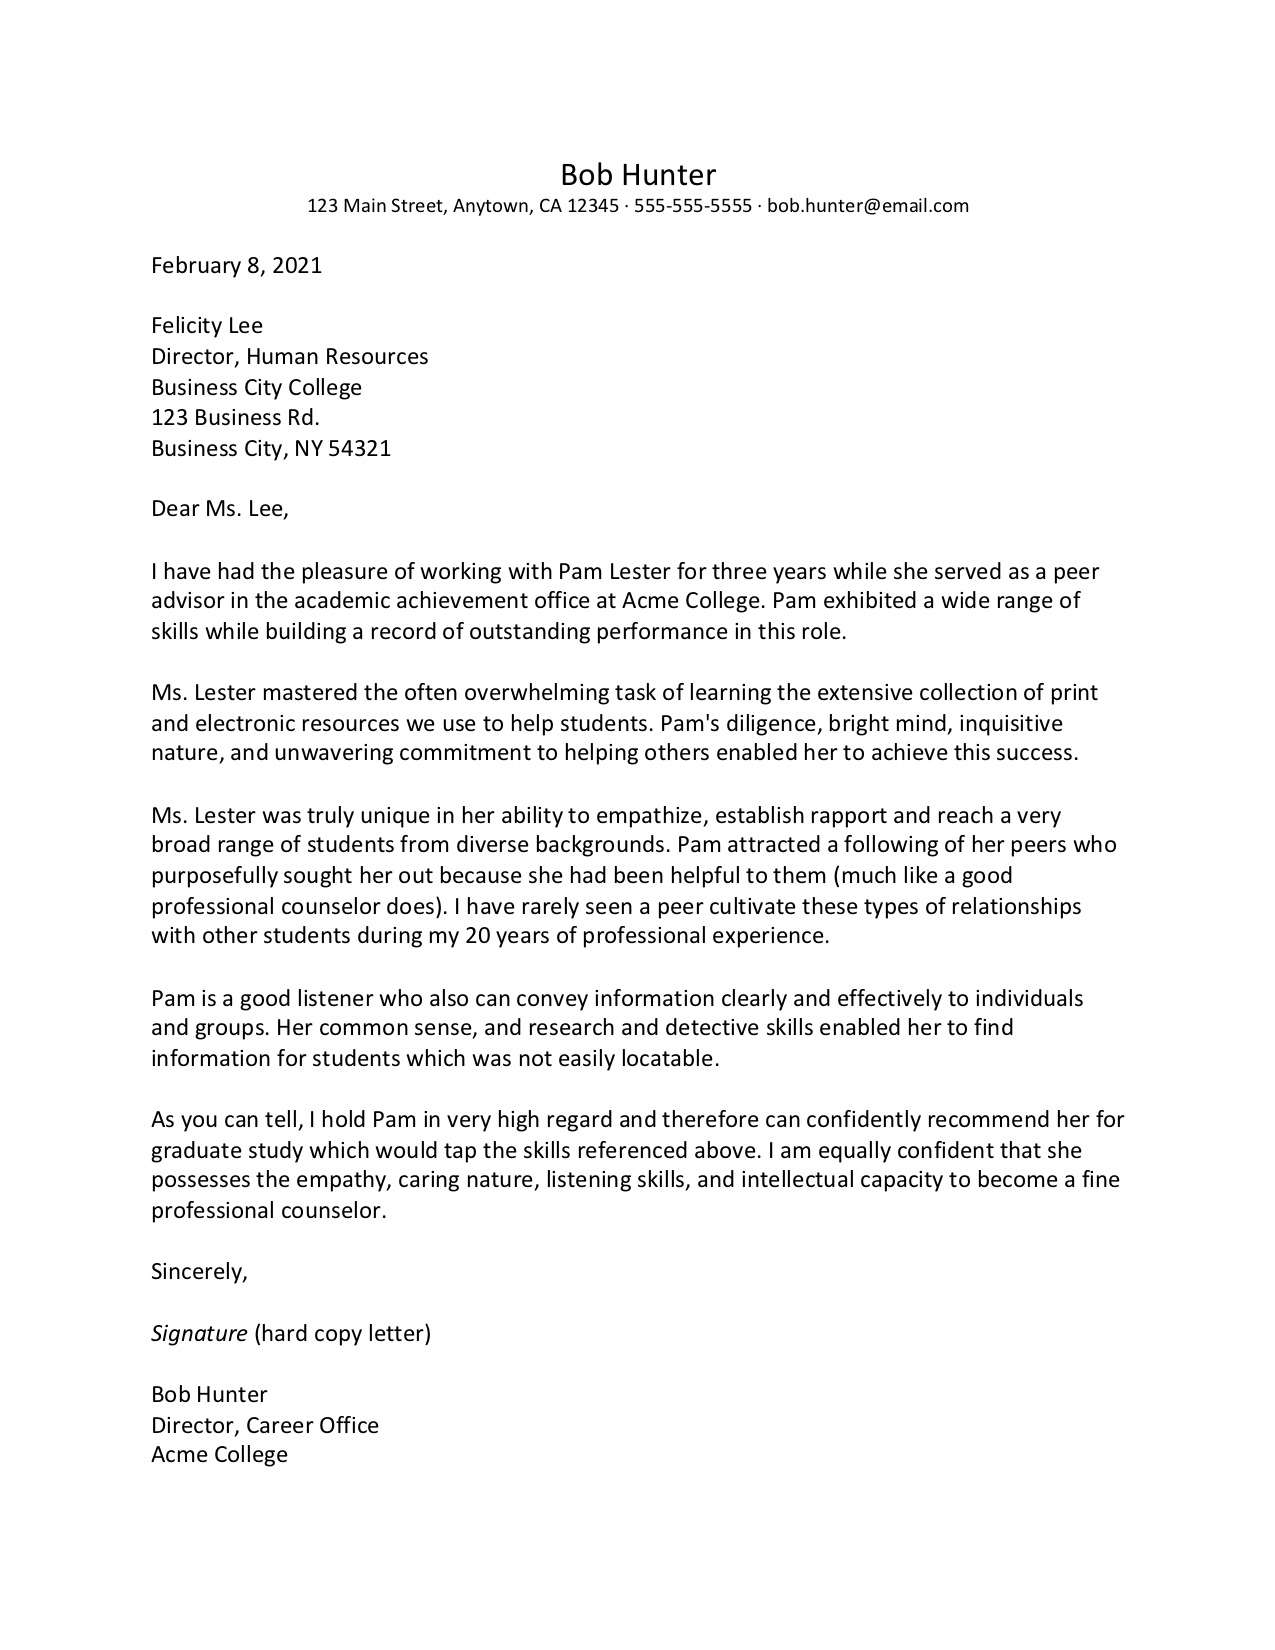 Recommendation Letter For Research Student